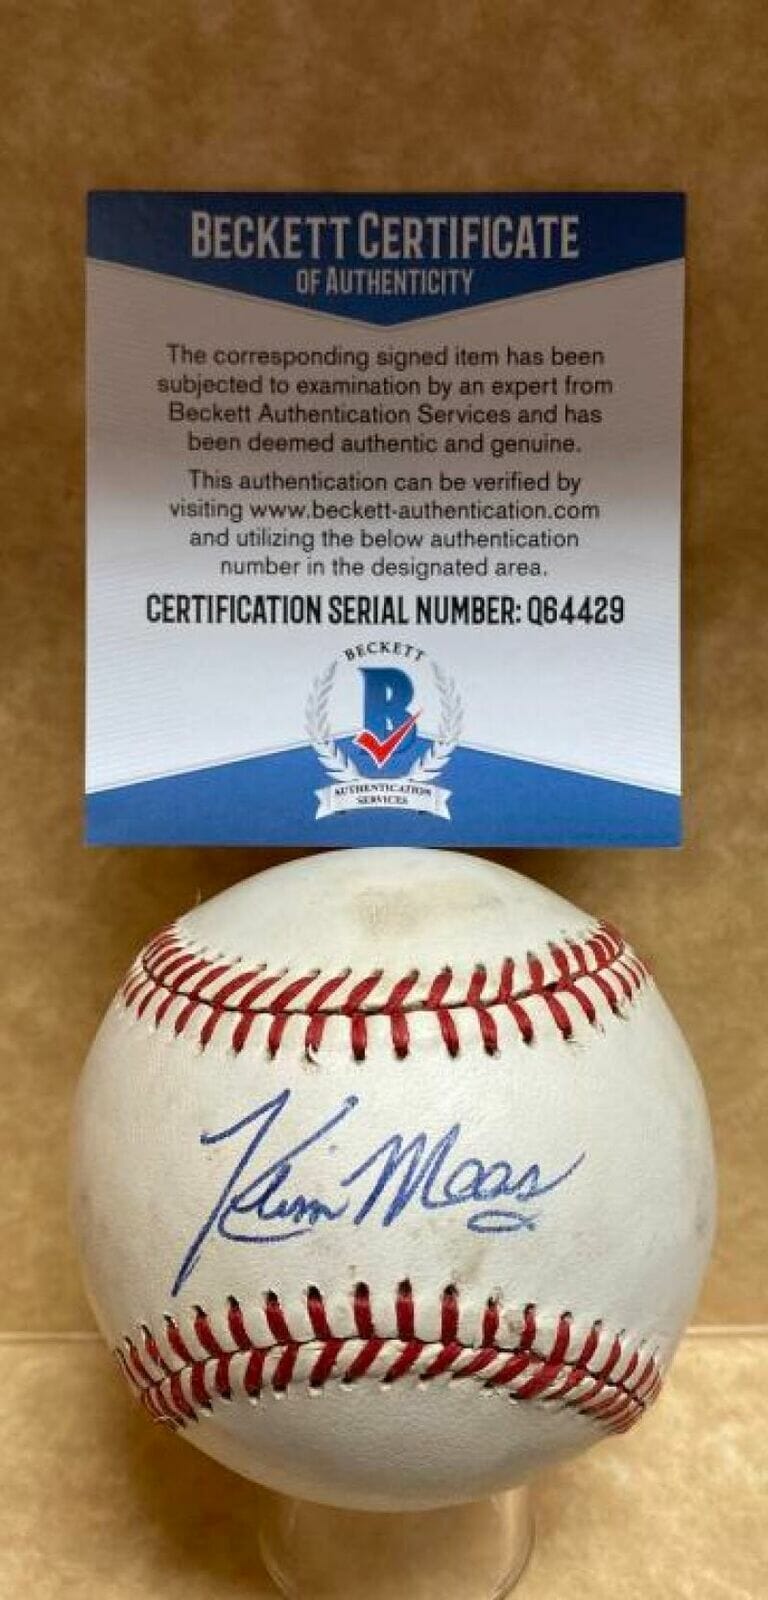 KEVIN MAAS NEW YORK YANKEES SIGNED AUTOGRAPHED A.L. BASEBALL BECKETT Q64429
 COLLECTIBLE MEMORABILIA